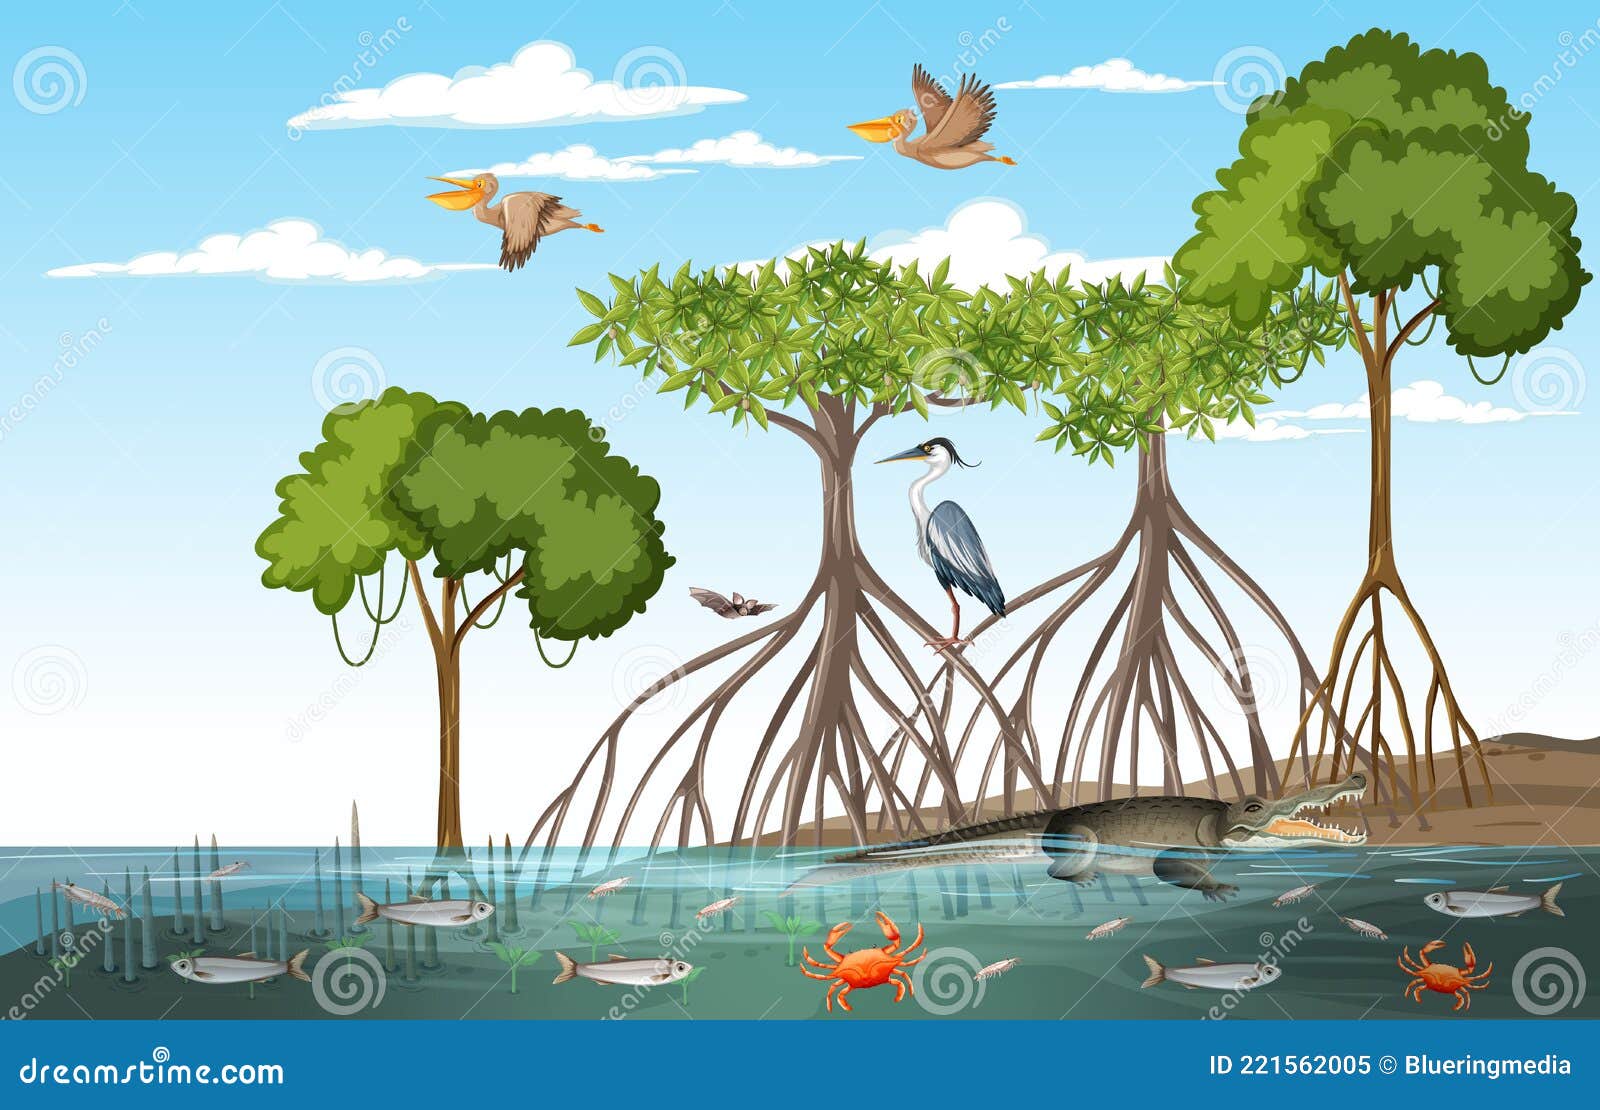 Mangrove Forest Scene at Daytime with Animals Stock Vector ...